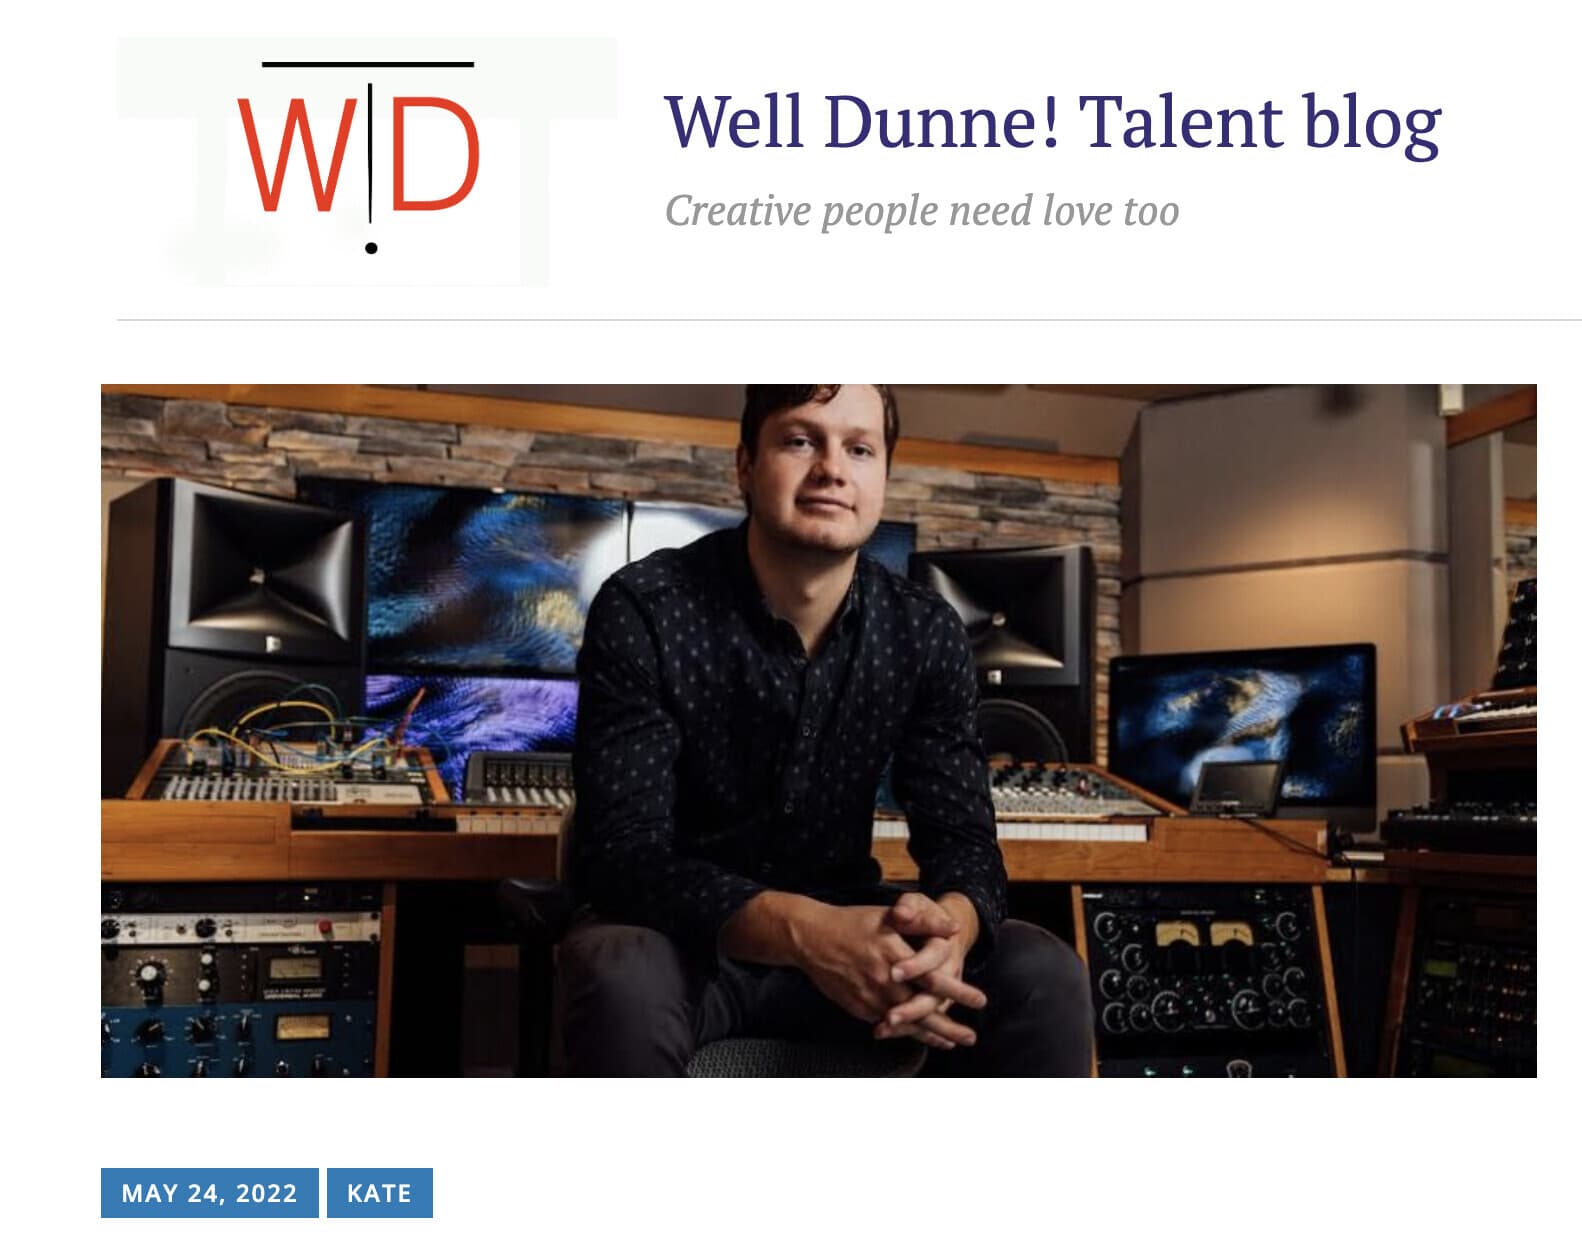 Well Dunne! Talent Blog features 11 One/Music launch